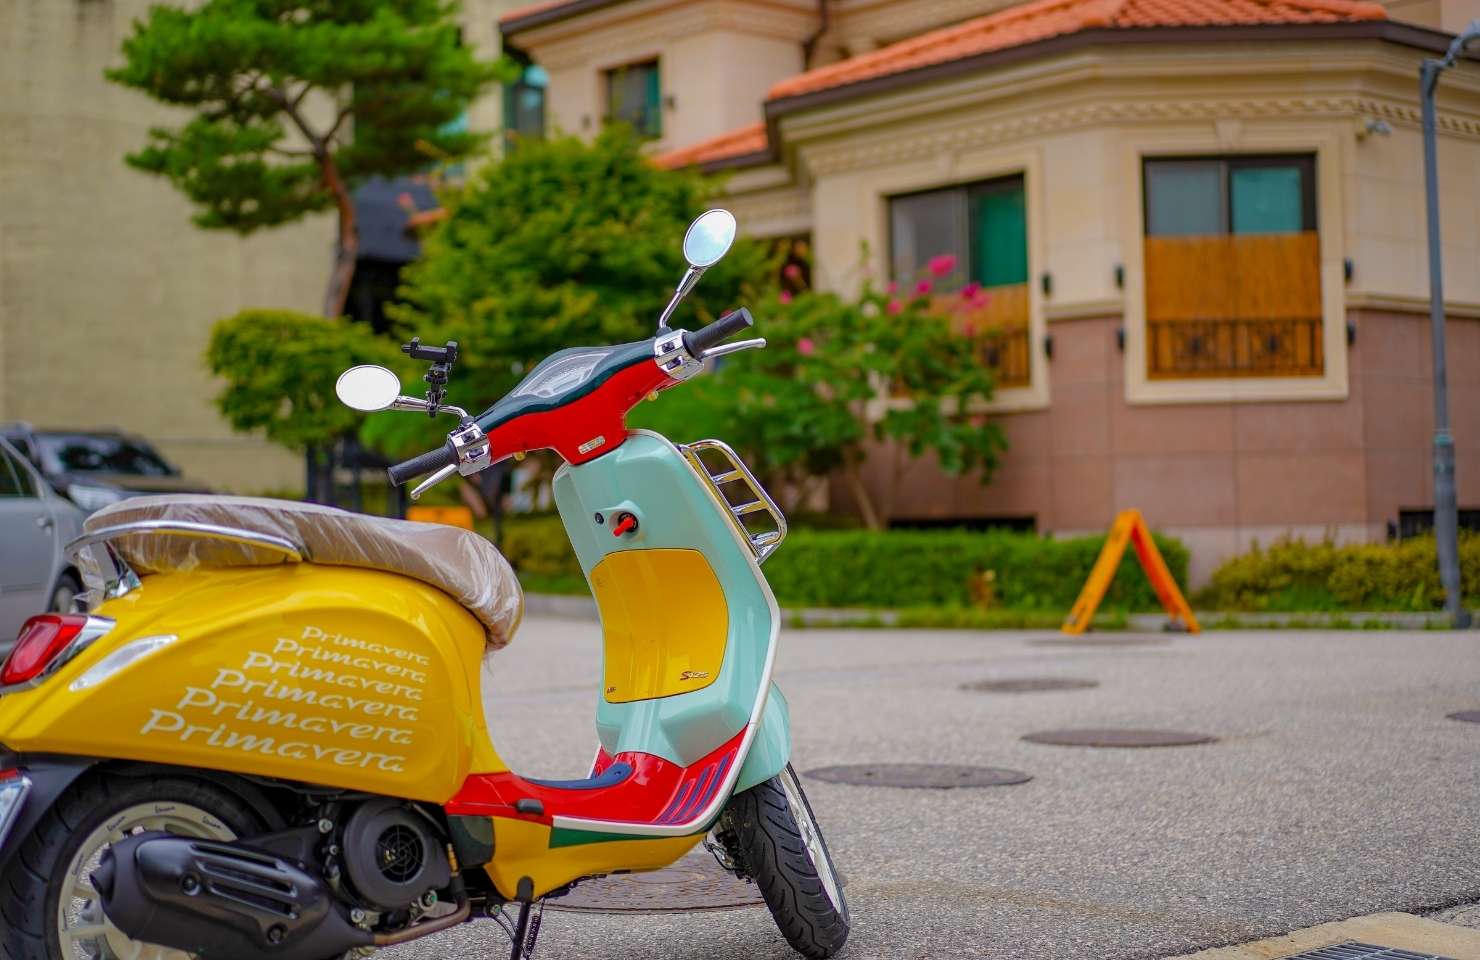 Italian Vespa in front of a house